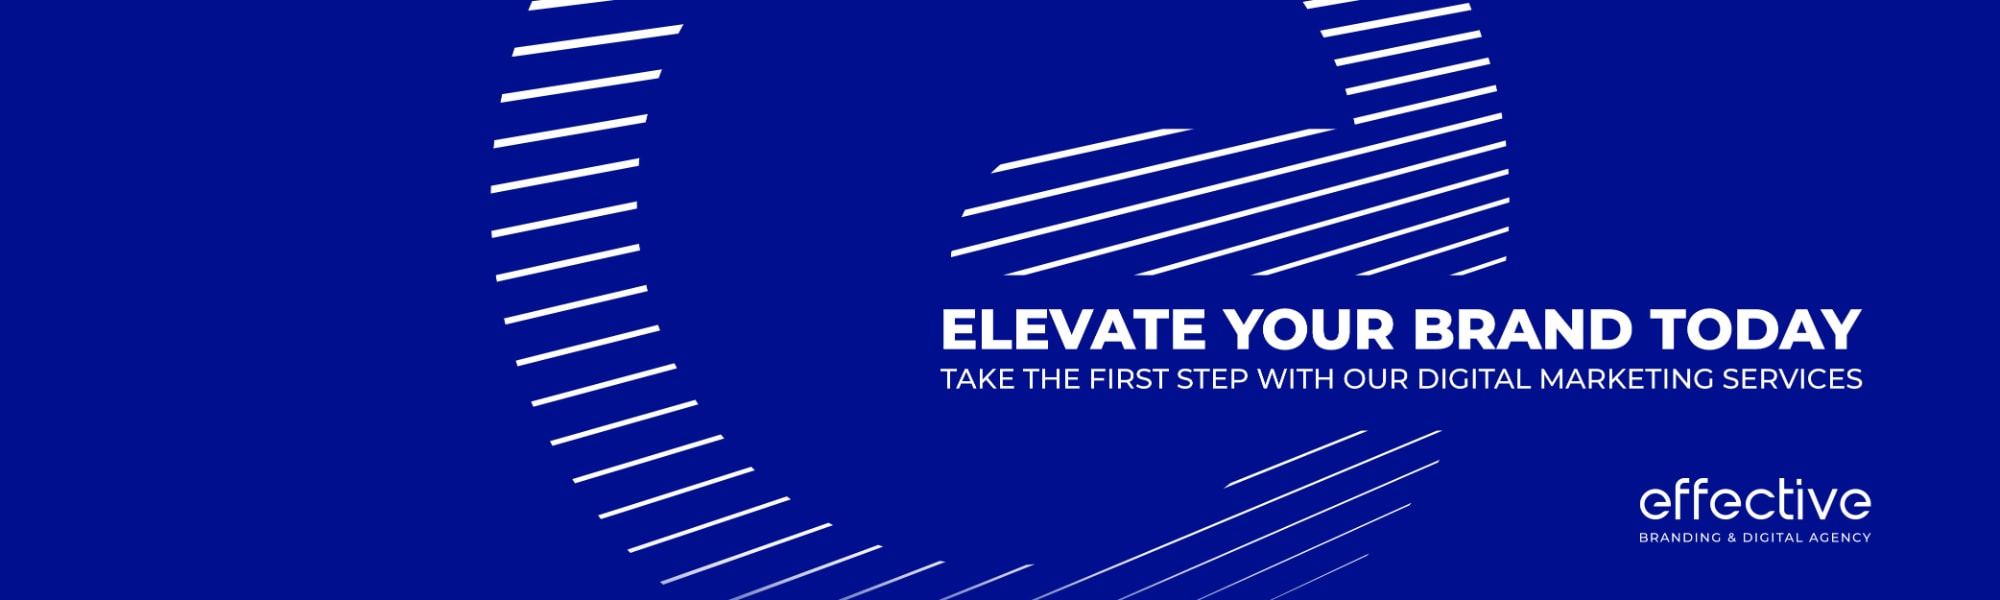 Elevate Your Brand Today Take the First Step with Our Digital Marketing Services